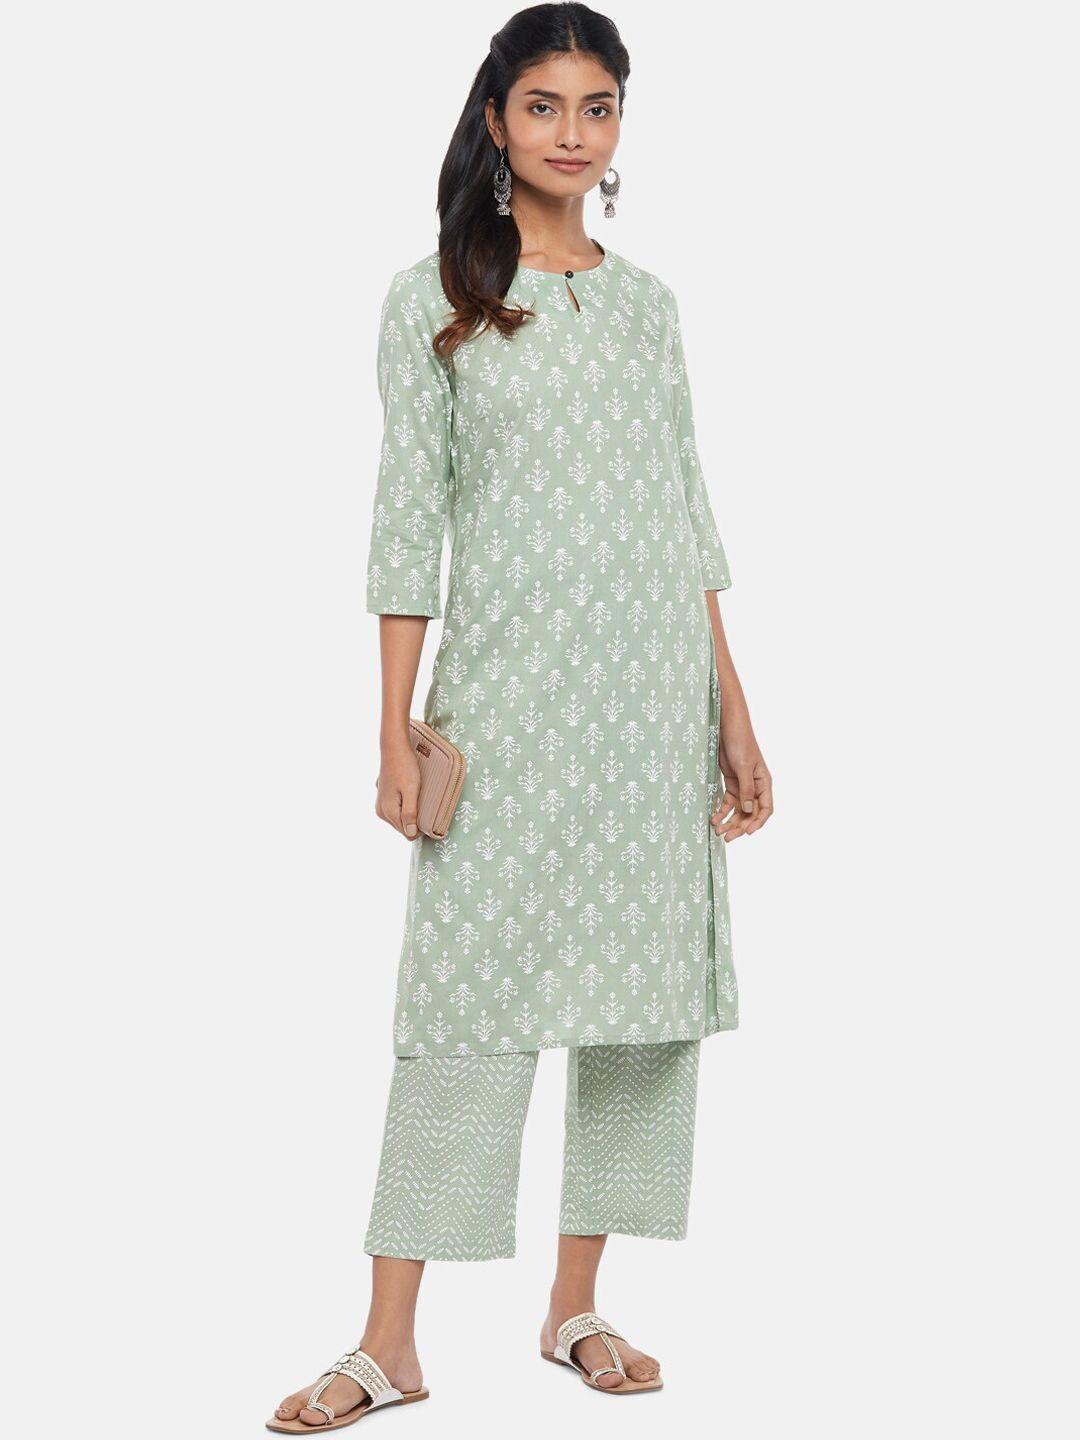 rangmanch by pantaloons women green floral printed kurta with trousers